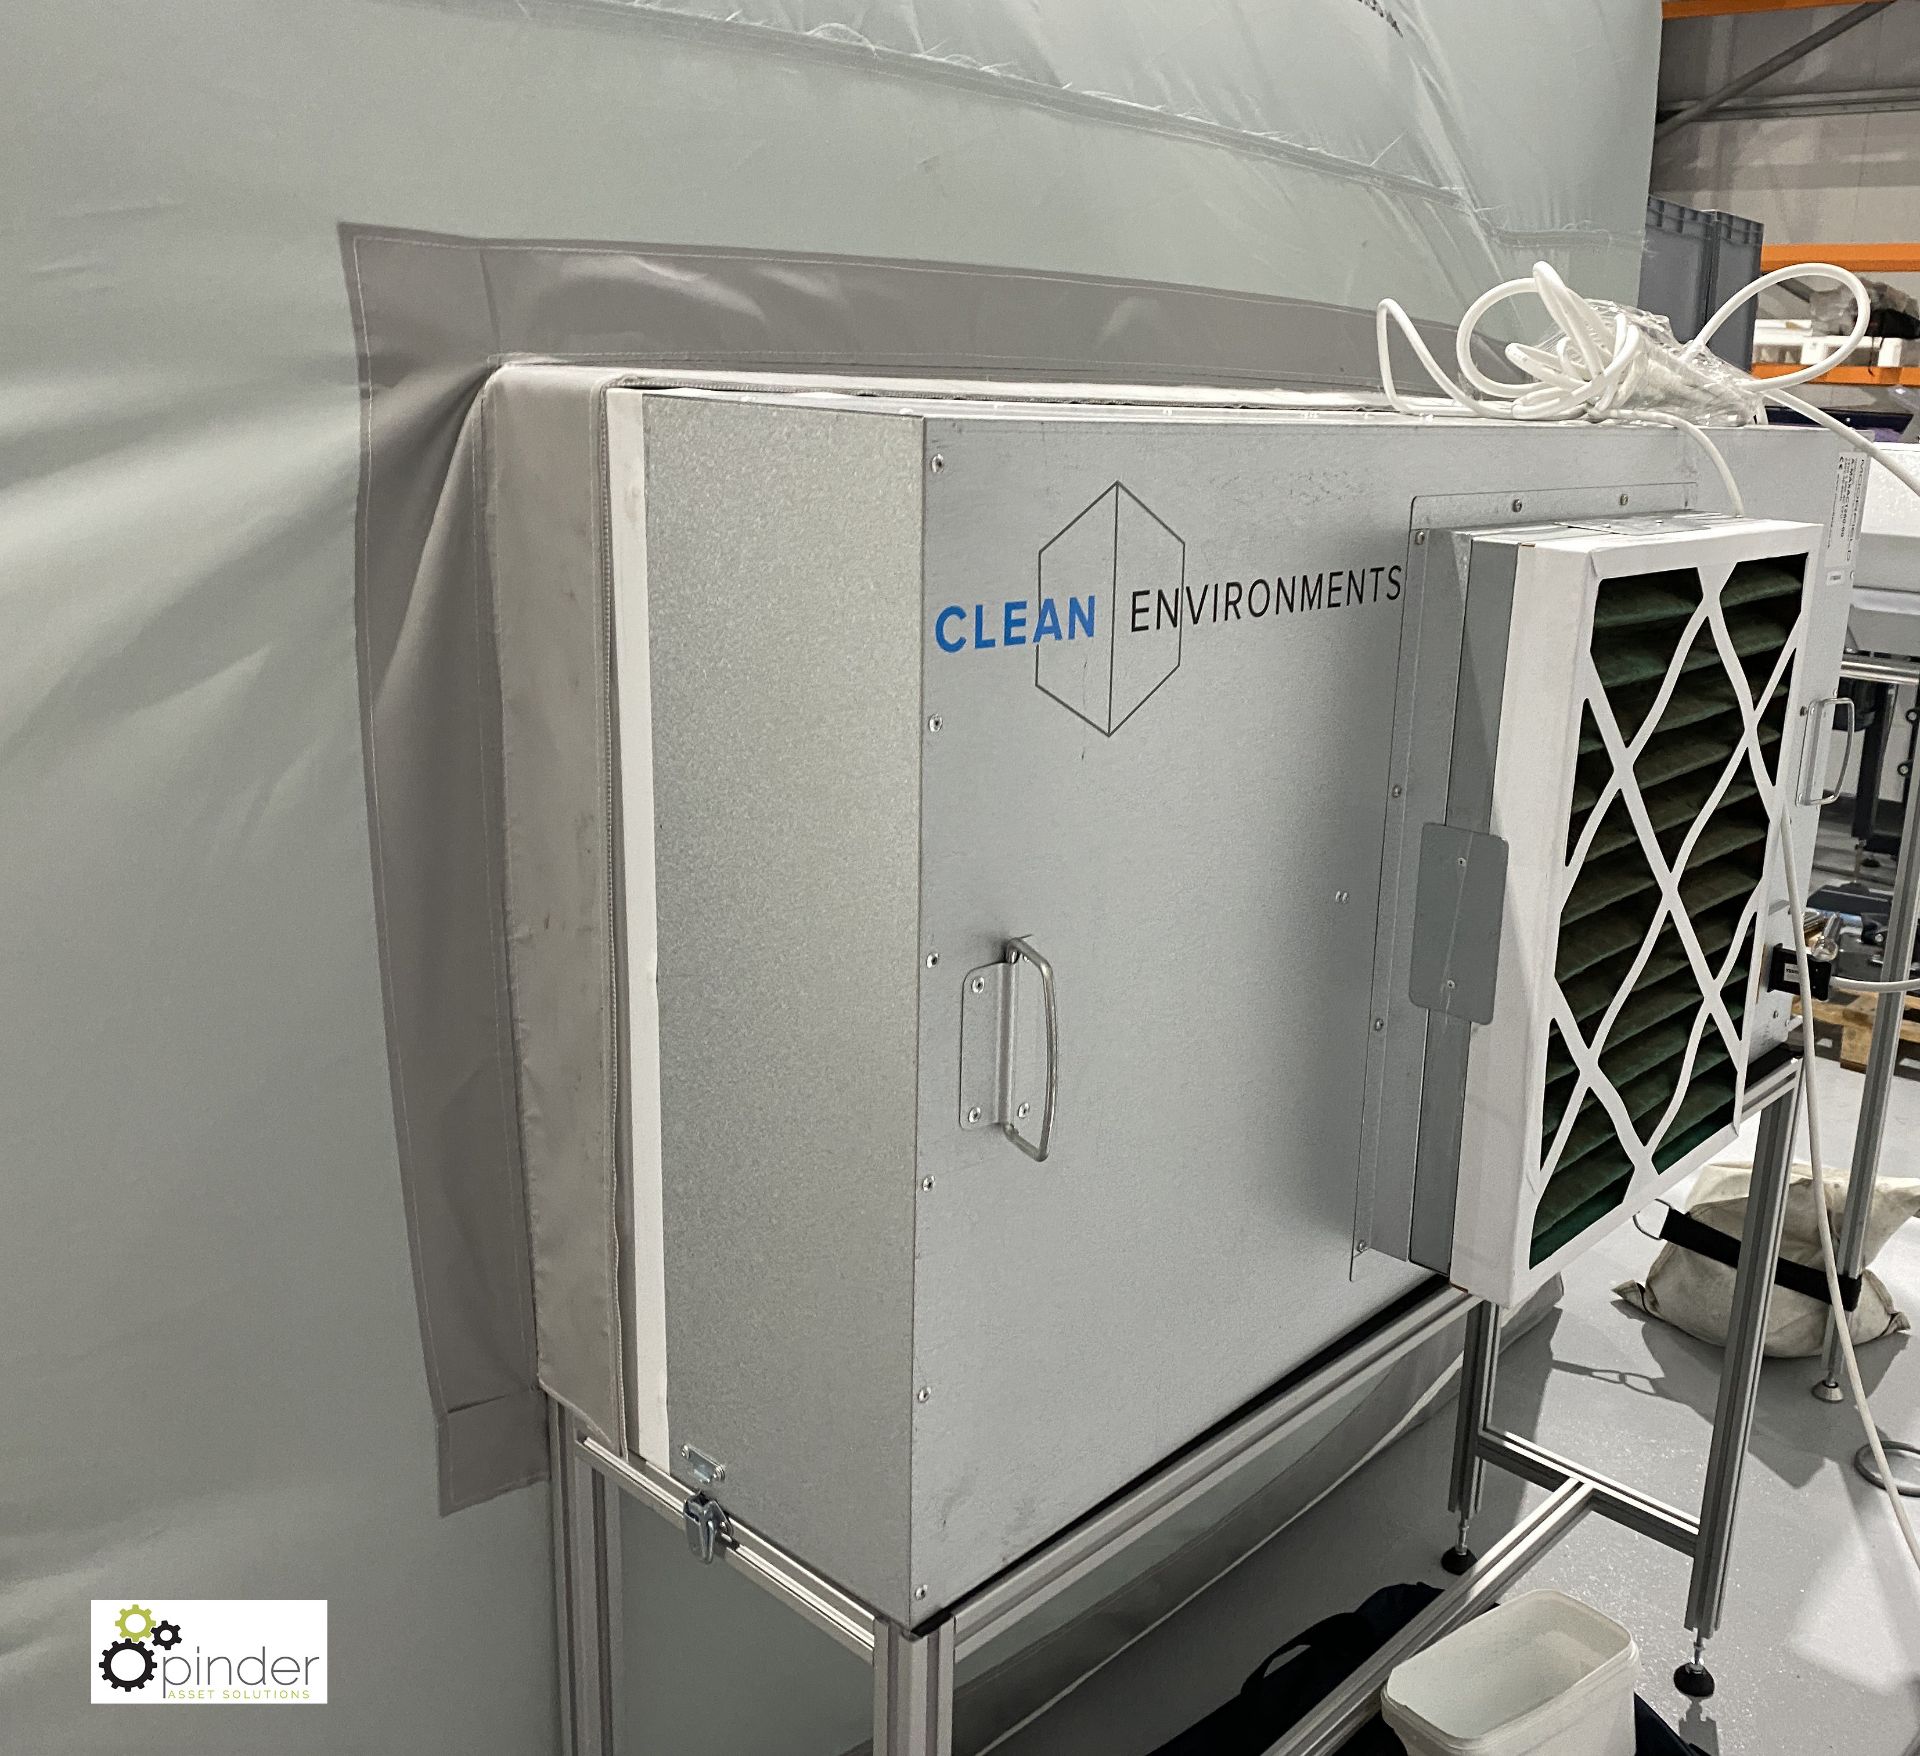 Clean Environment Clean Tent, 3800mm x 2500mm x 2200mm high, with air circulation system, filter and - Image 5 of 11